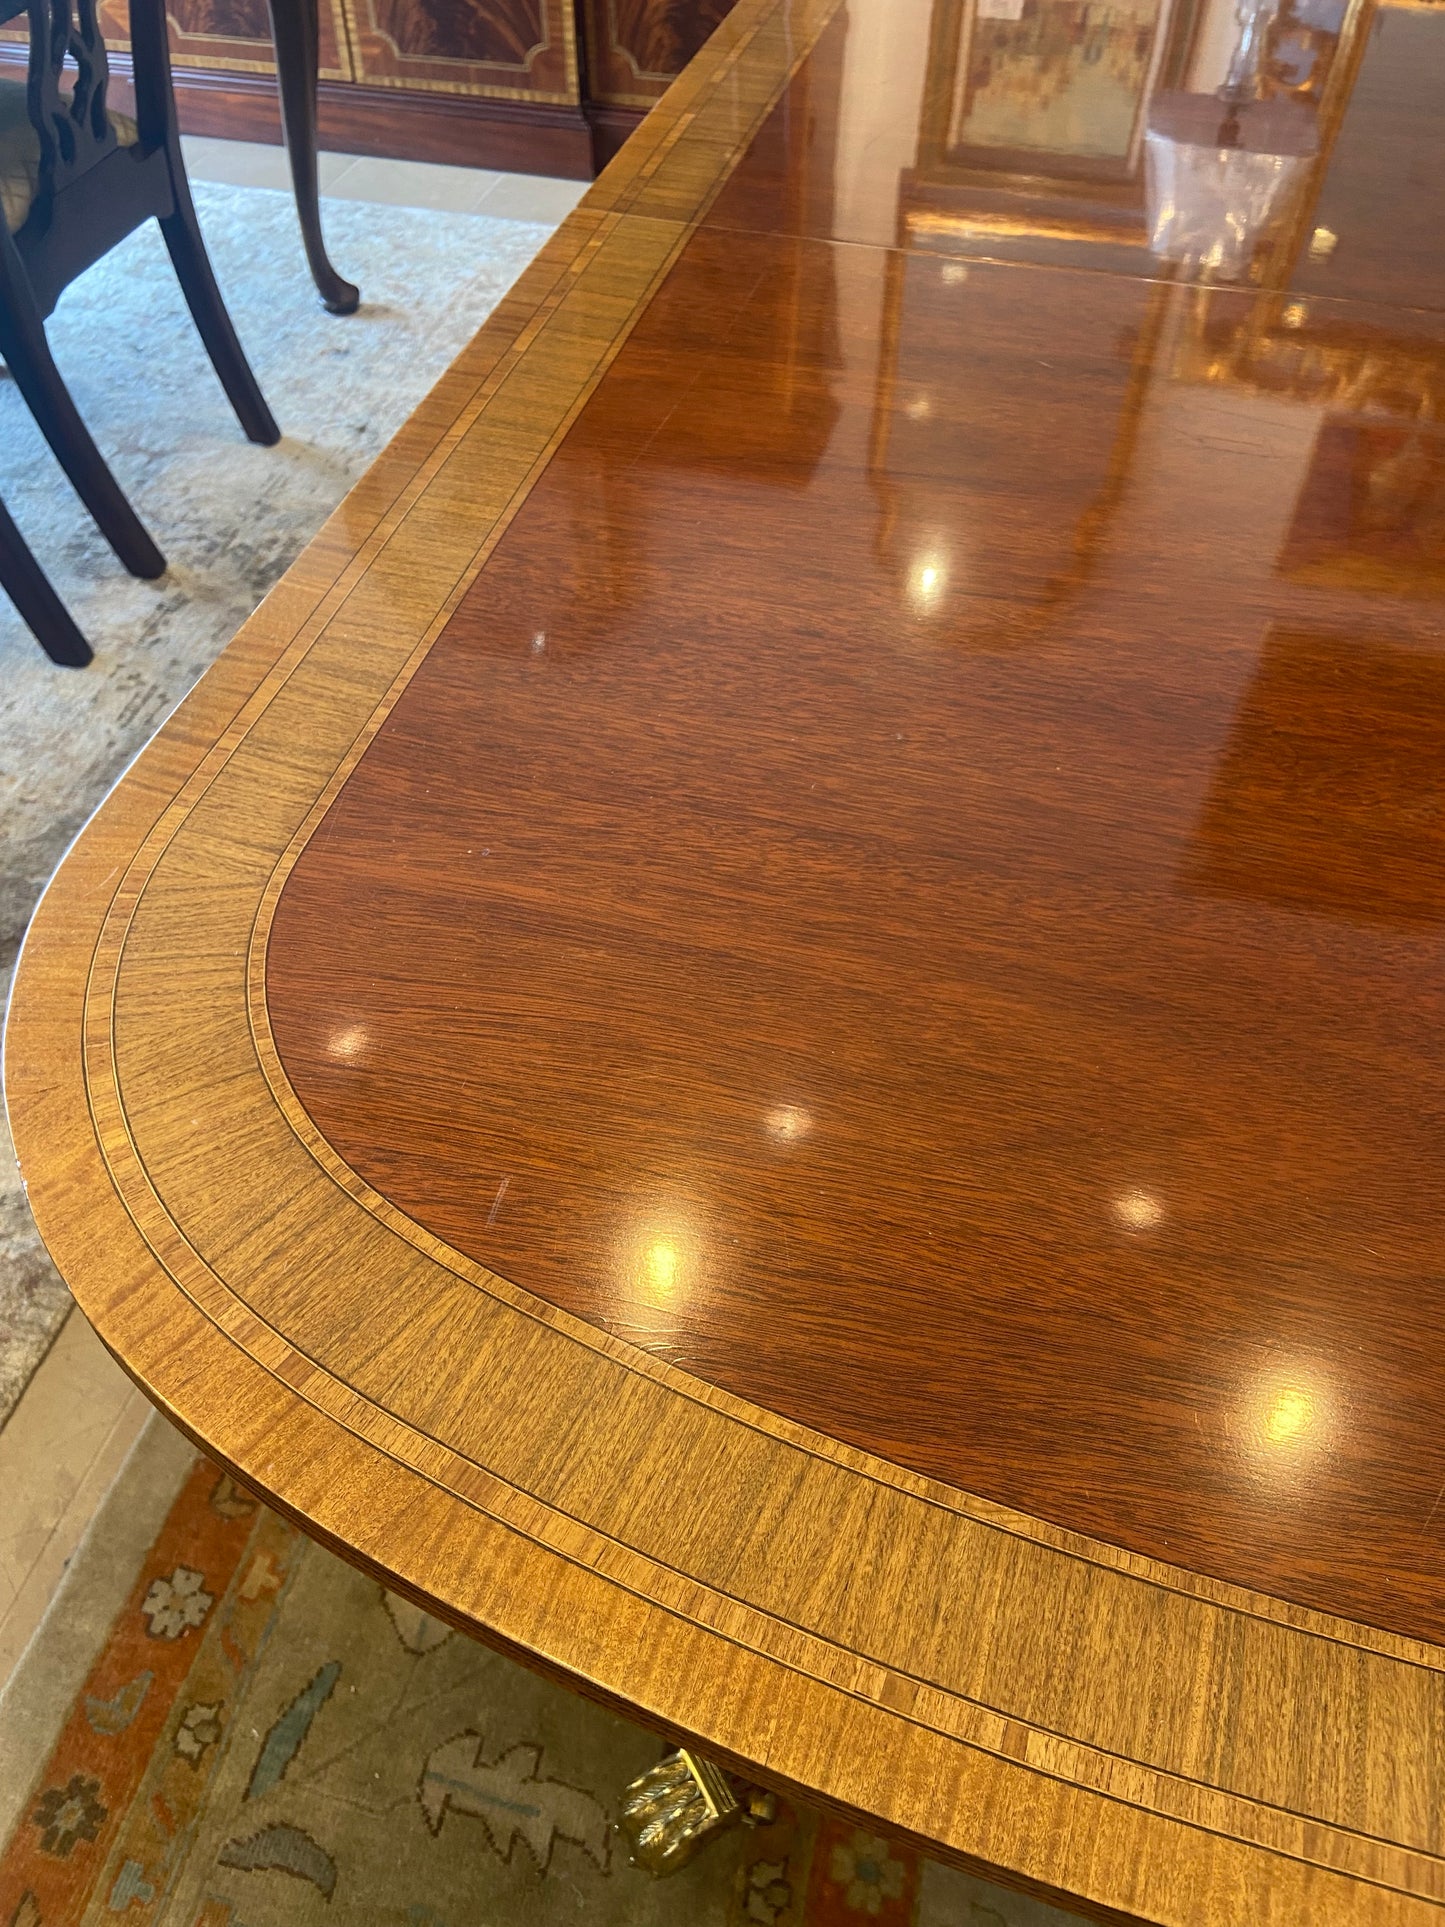 Coucill Ovular Banded Dining Table